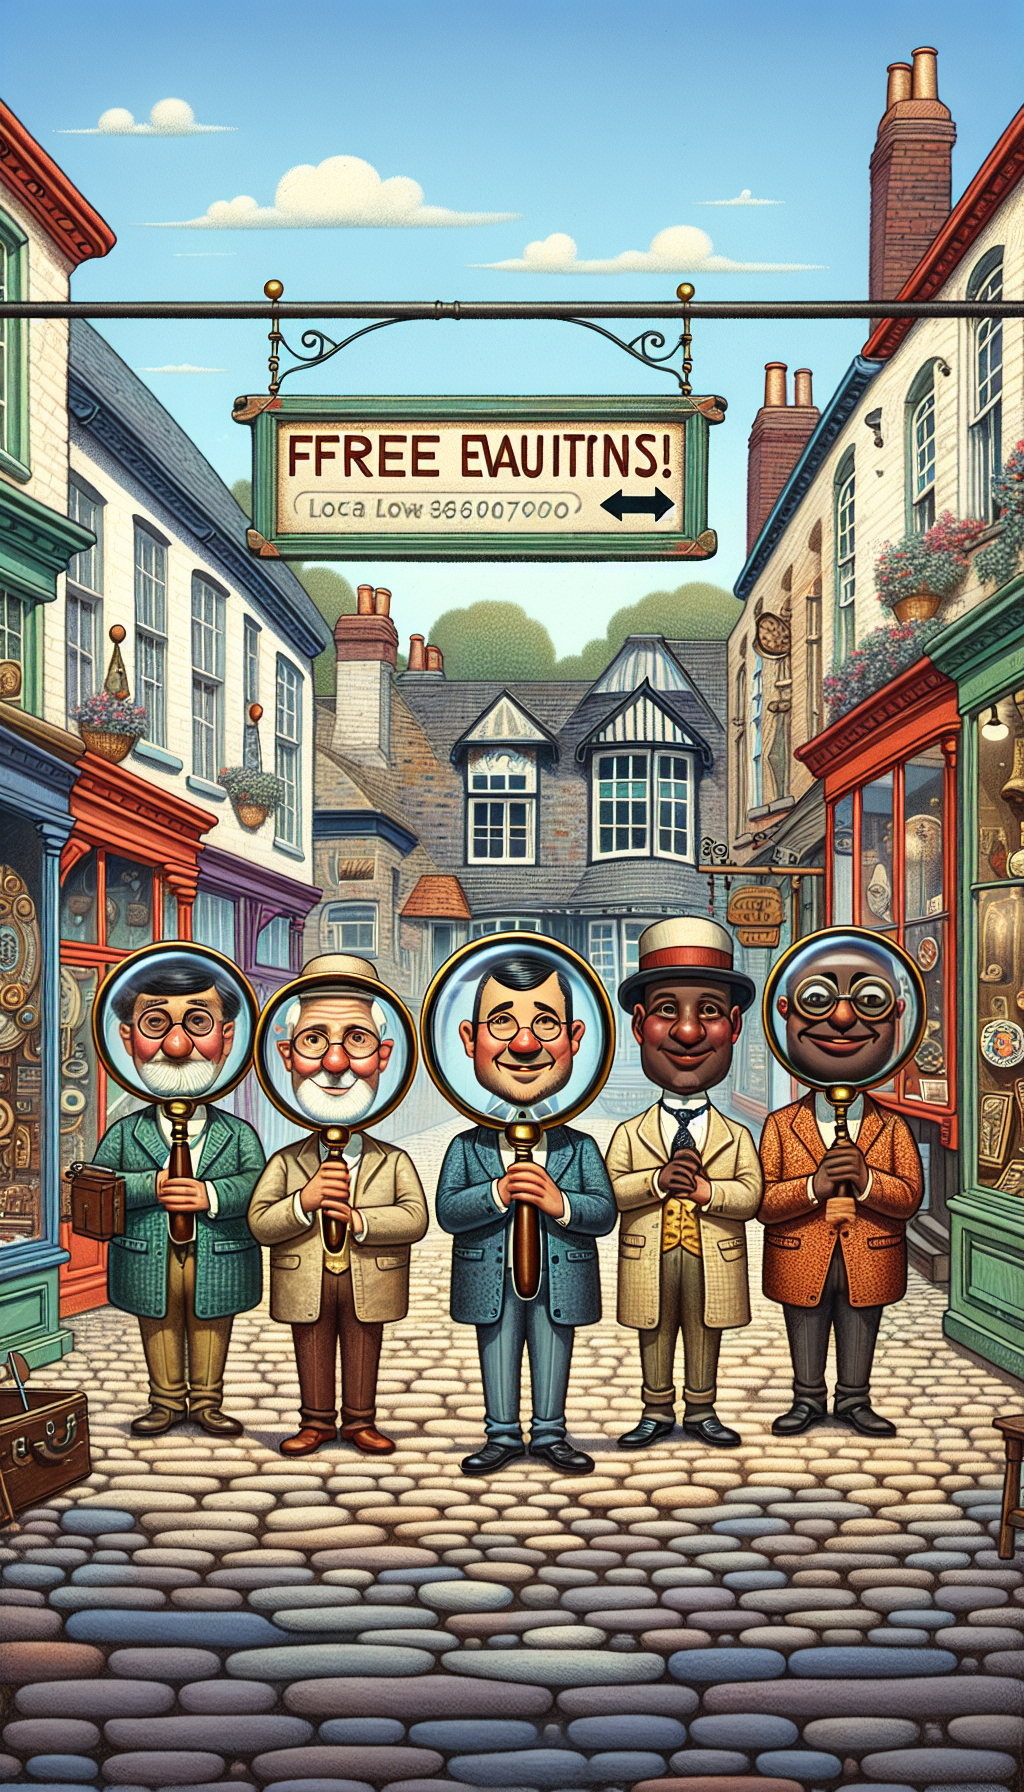 A whimsical illustration featuring a quaint, cobblestone street lined with colorful, vintage storefronts, each displaying a unique antique item. In the foreground, a friendly group of caricatured expert appraisers with oversized magnifying glasses warmly beckons passersby. A sign hangs above them, offering 'Free Evaluations!' with an arrow pointing towards the smiling experts, subtly forming a search icon to suggest local accessibility.